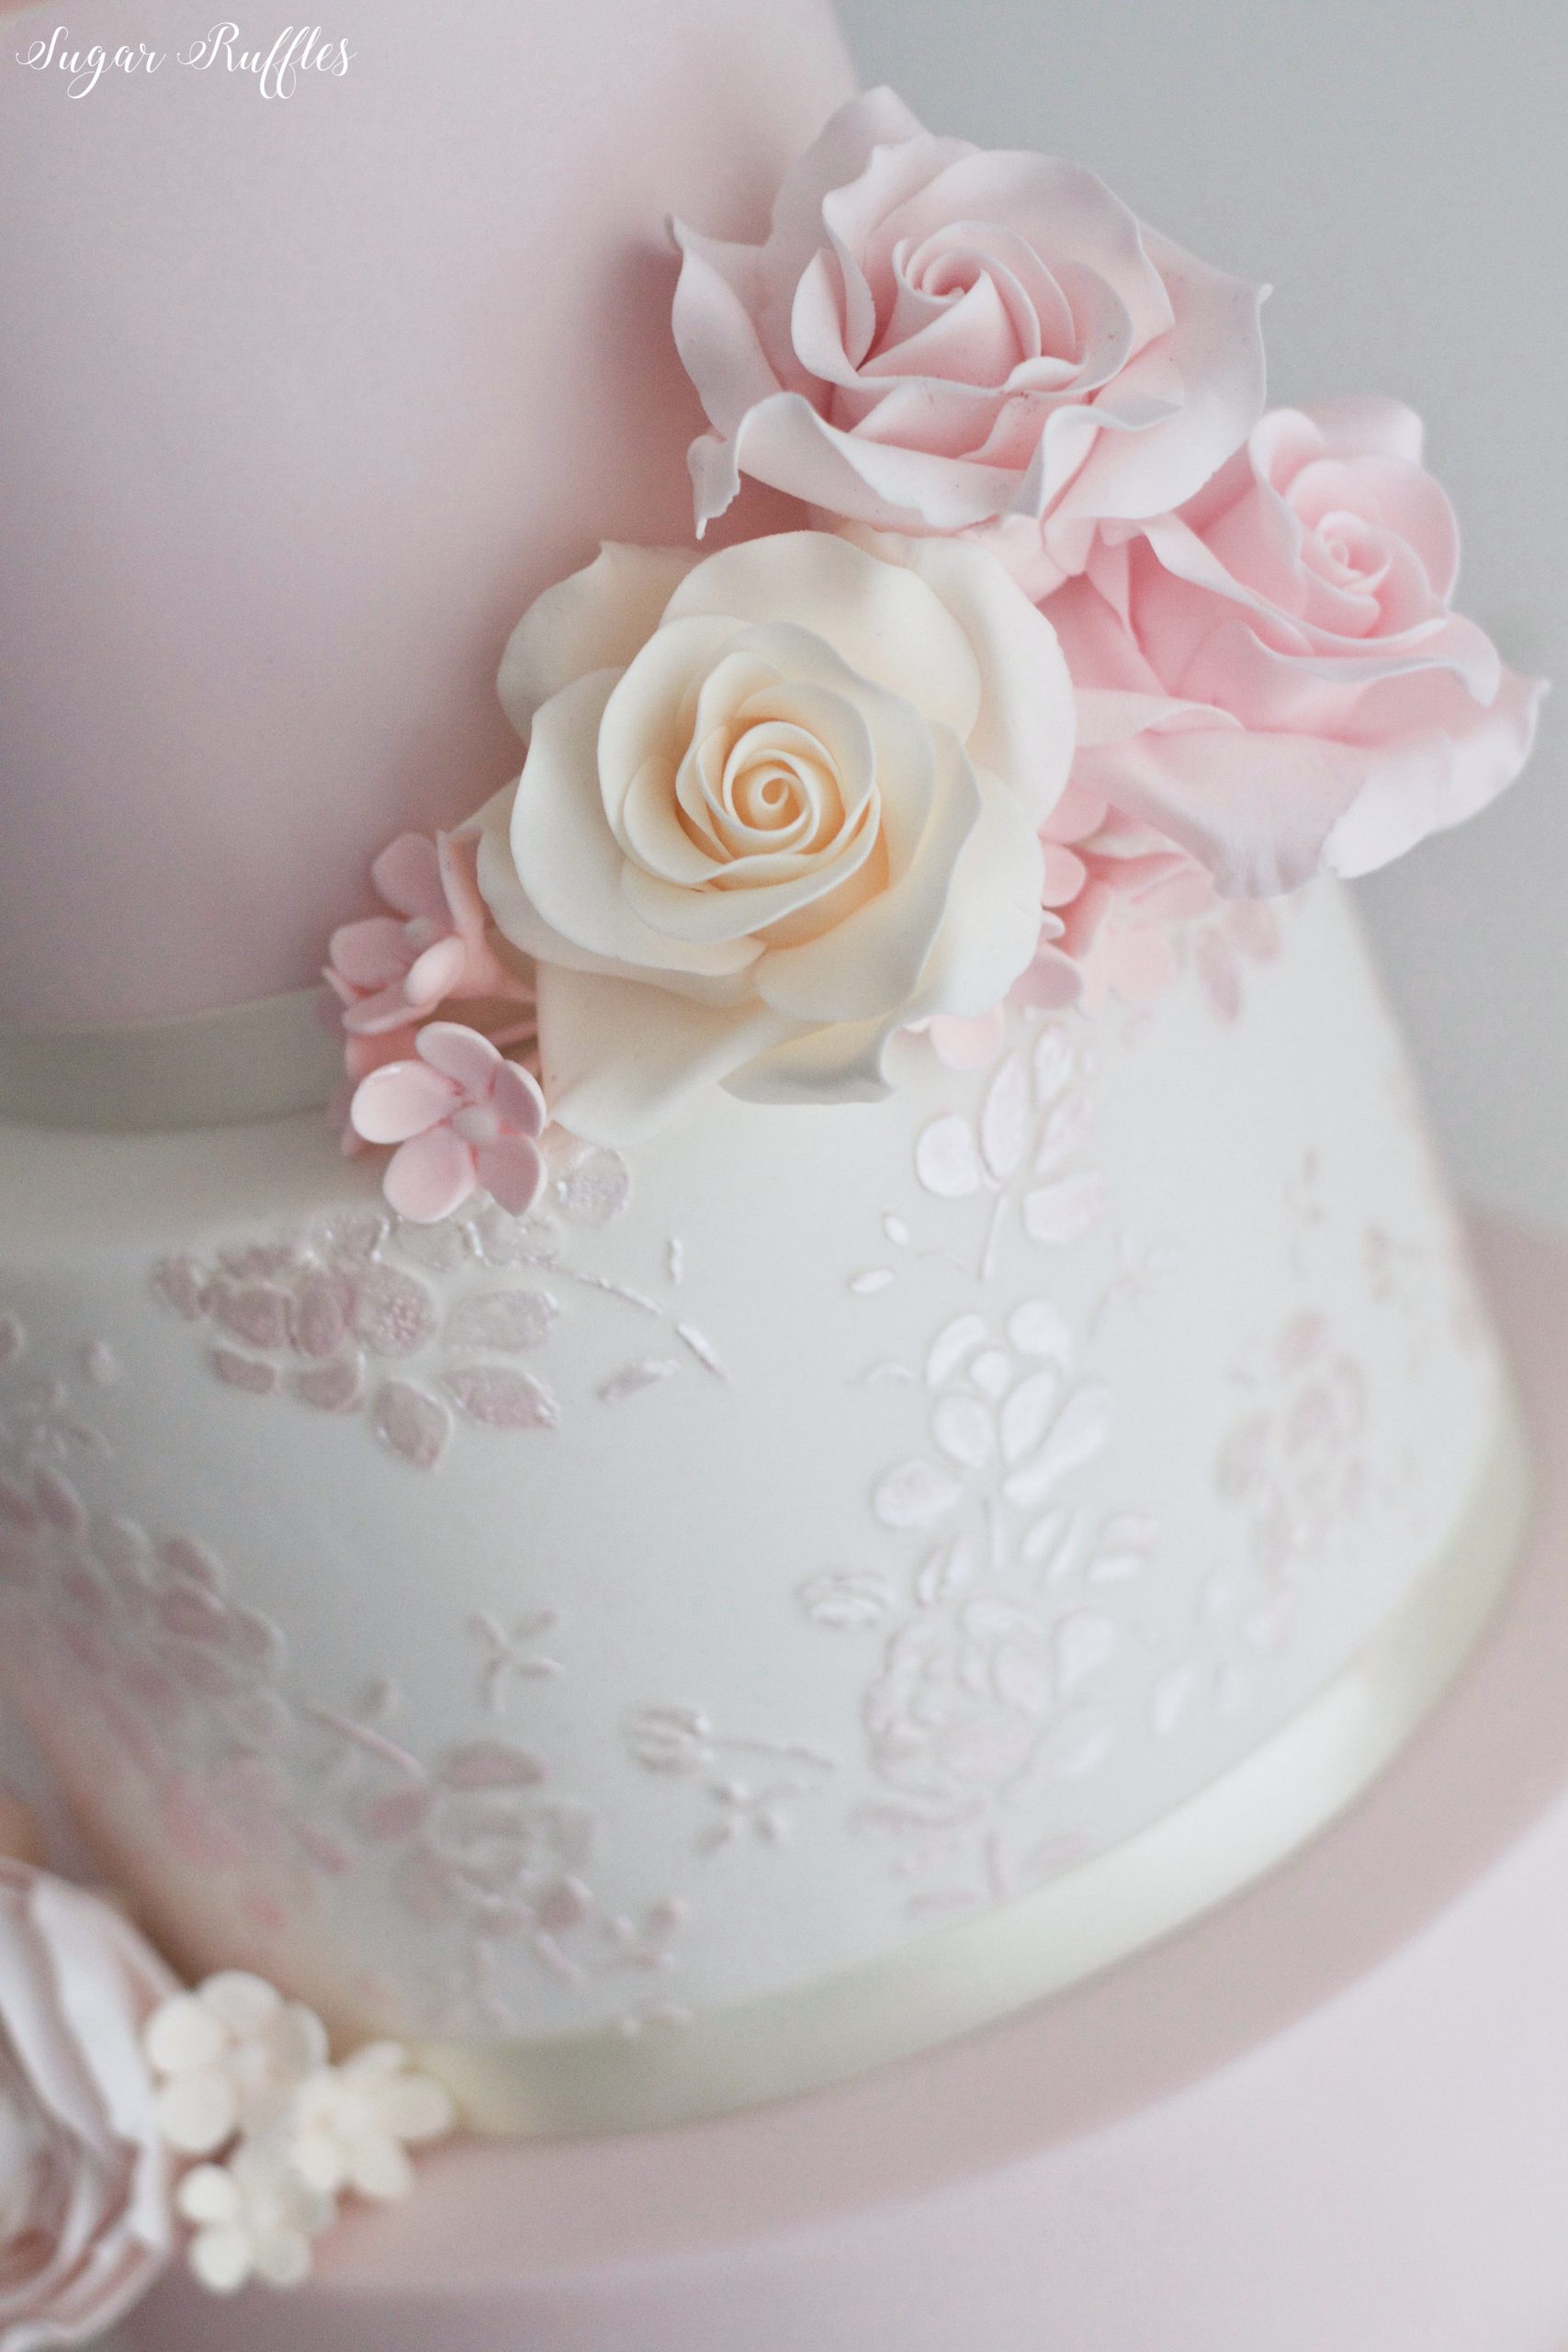 Elevate Your Cake Decorating with Stunning Cake Stencils